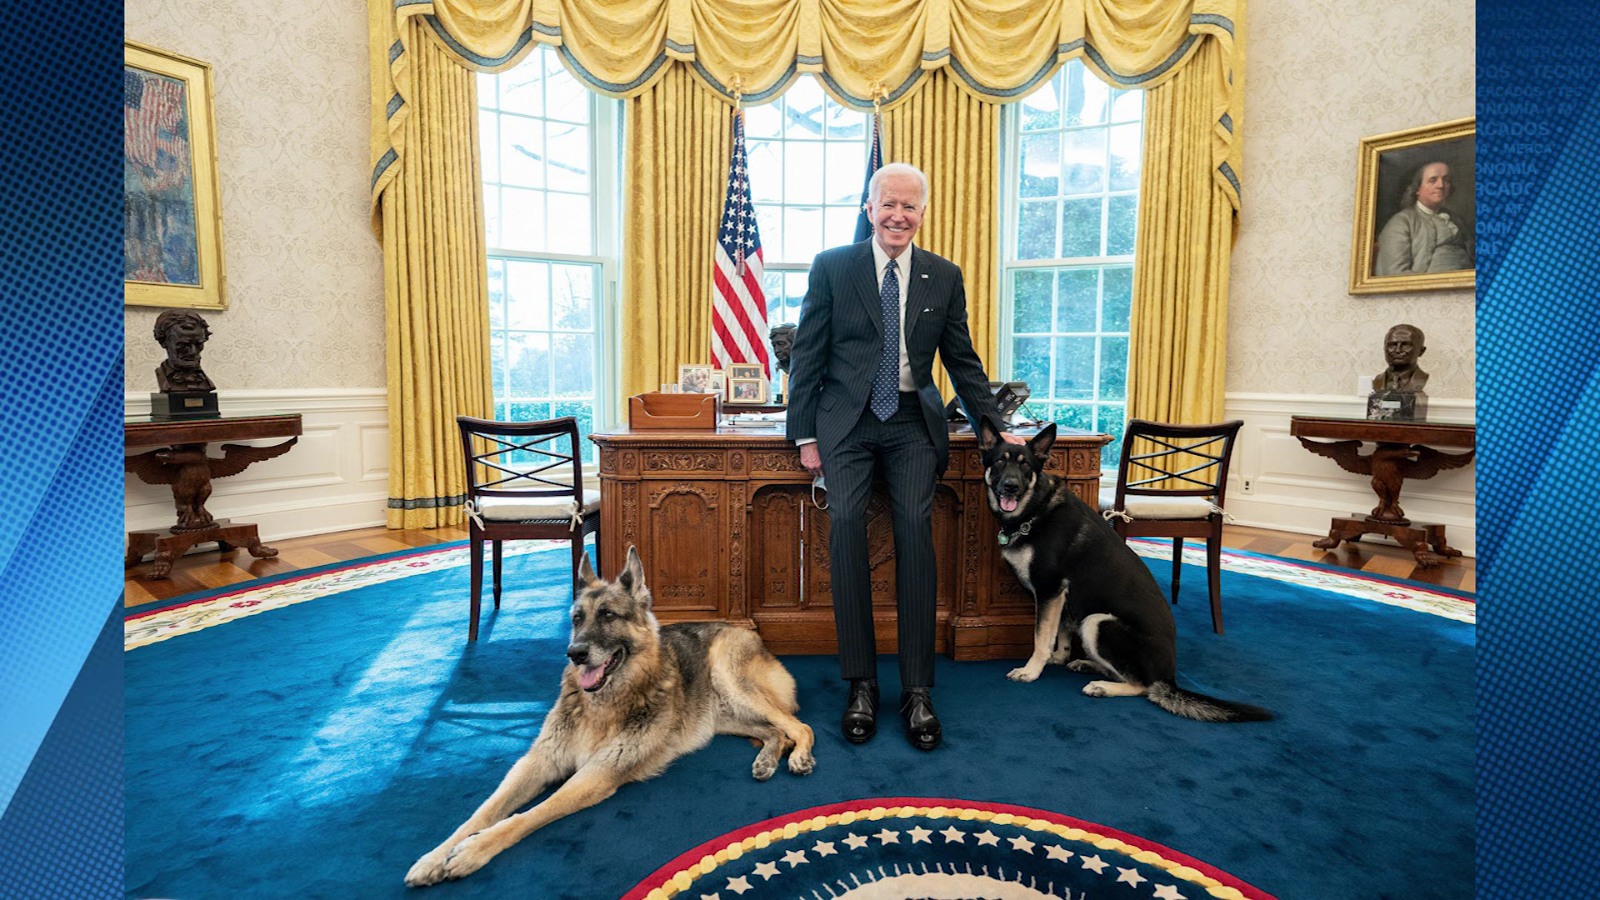 Biden: My dogs have privileged access to the oval office